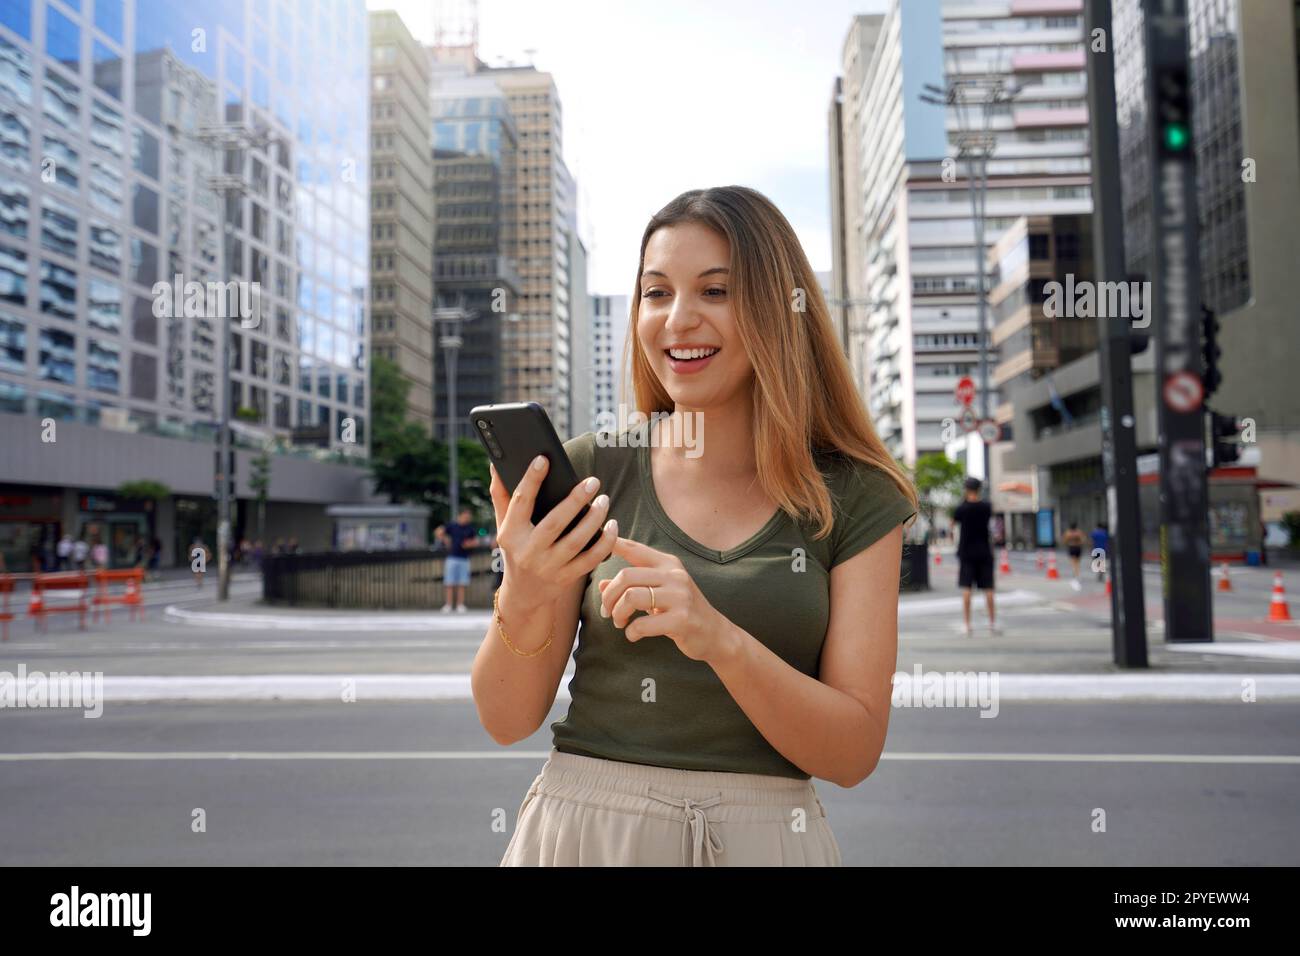 Cheerful Brazilian girl watching funny video on phone standing on street at daytime. Brown-haired with toothy smile wears green t-shirt. Social media addiction concept. Stock Photo